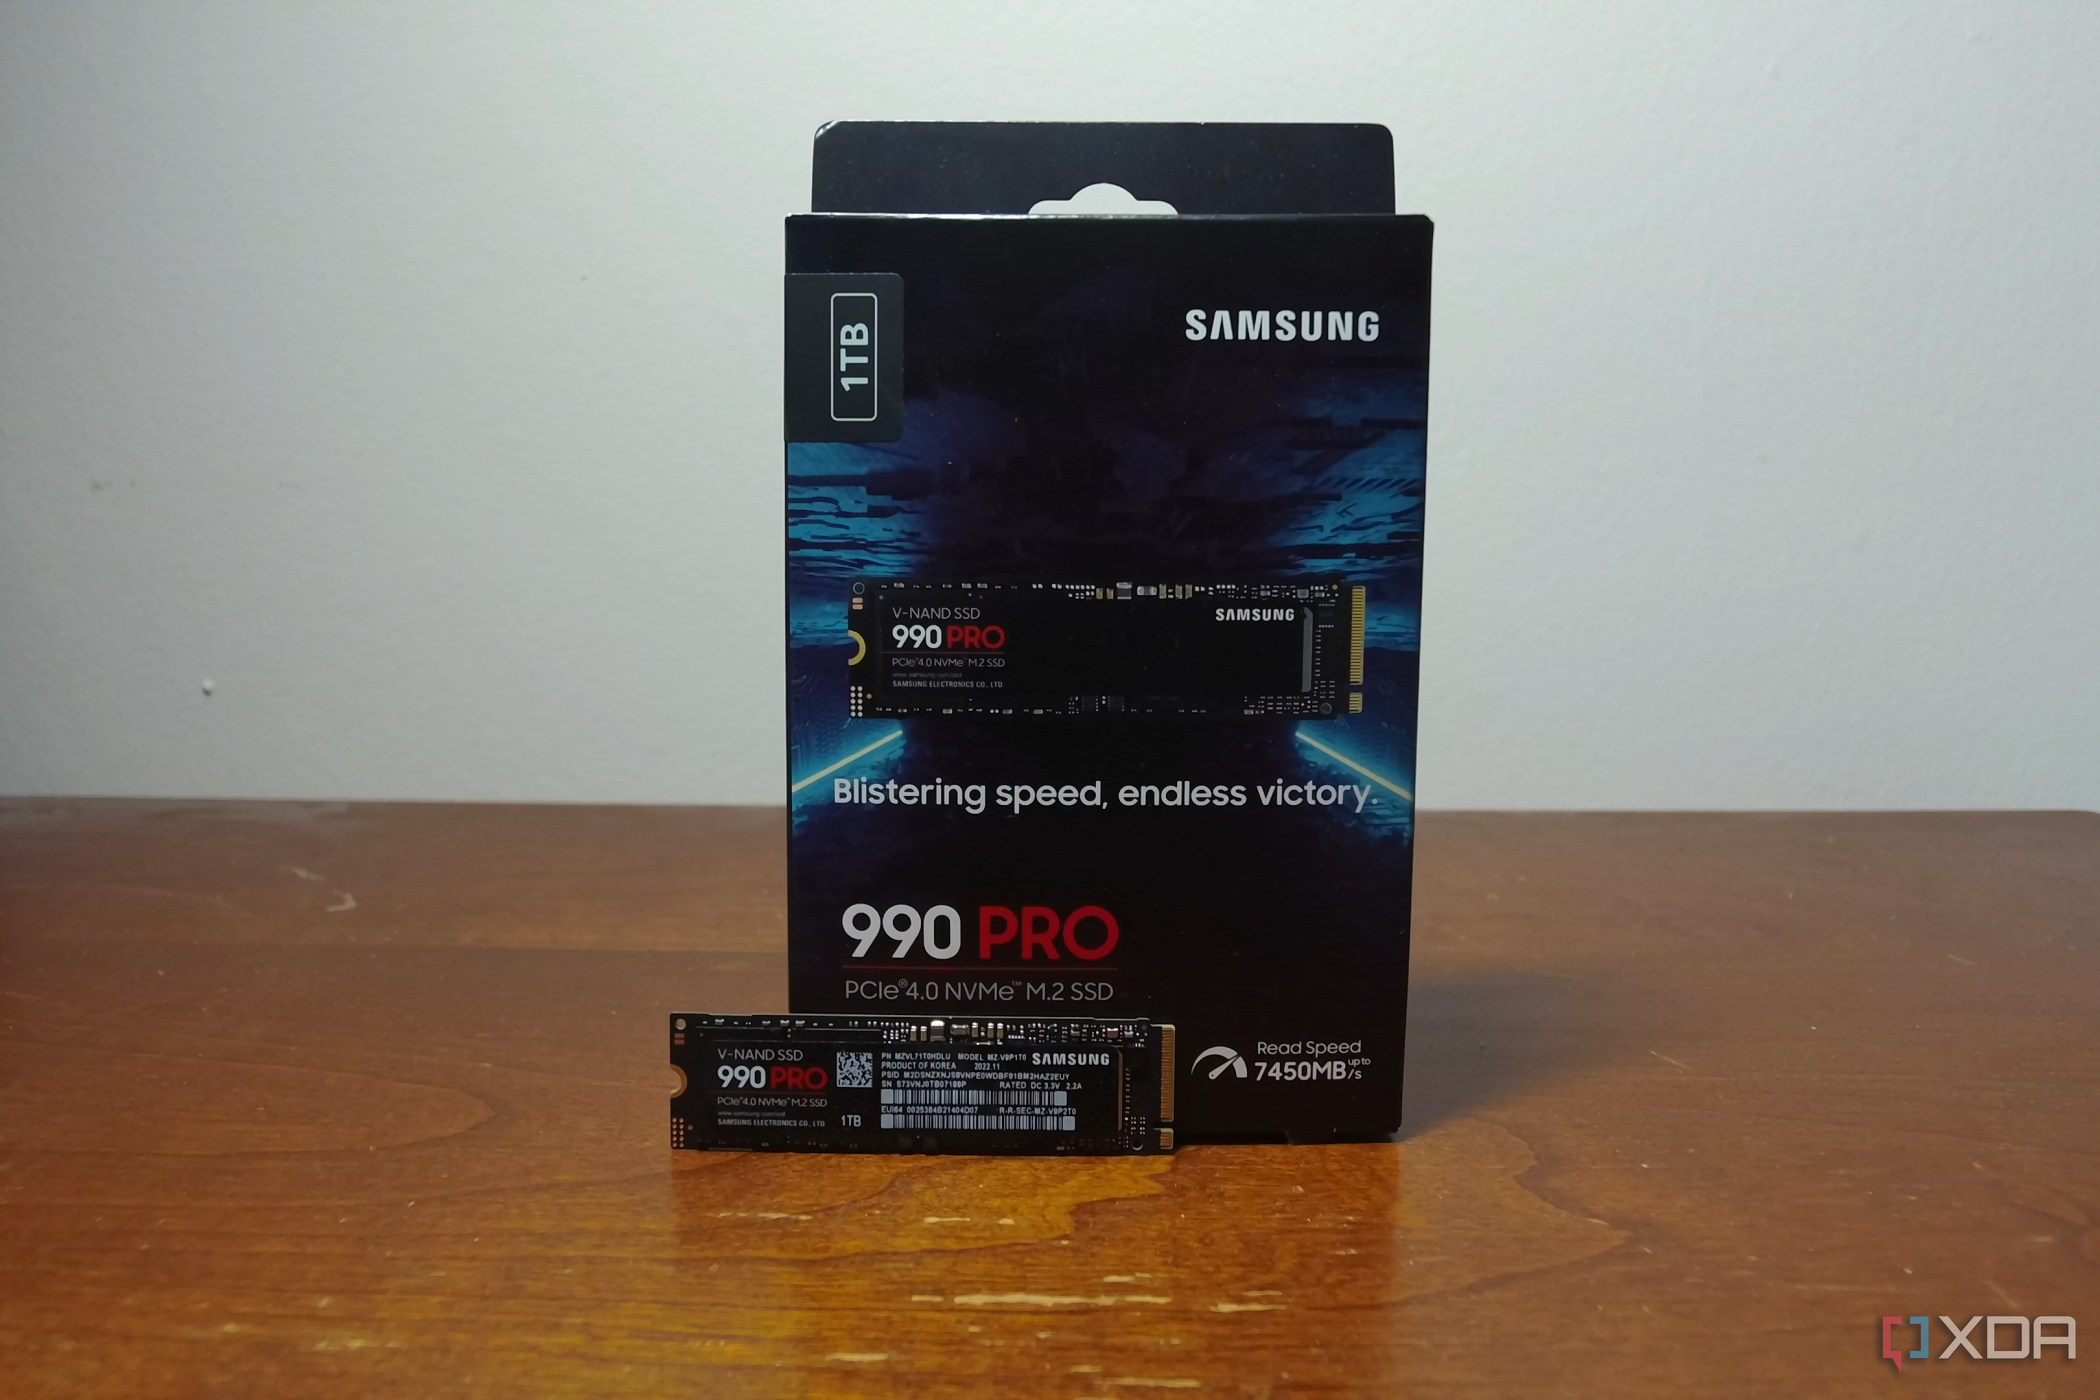 Samsung 990 Pro SSD review: The pinnacle of Gen 4 SSD performance